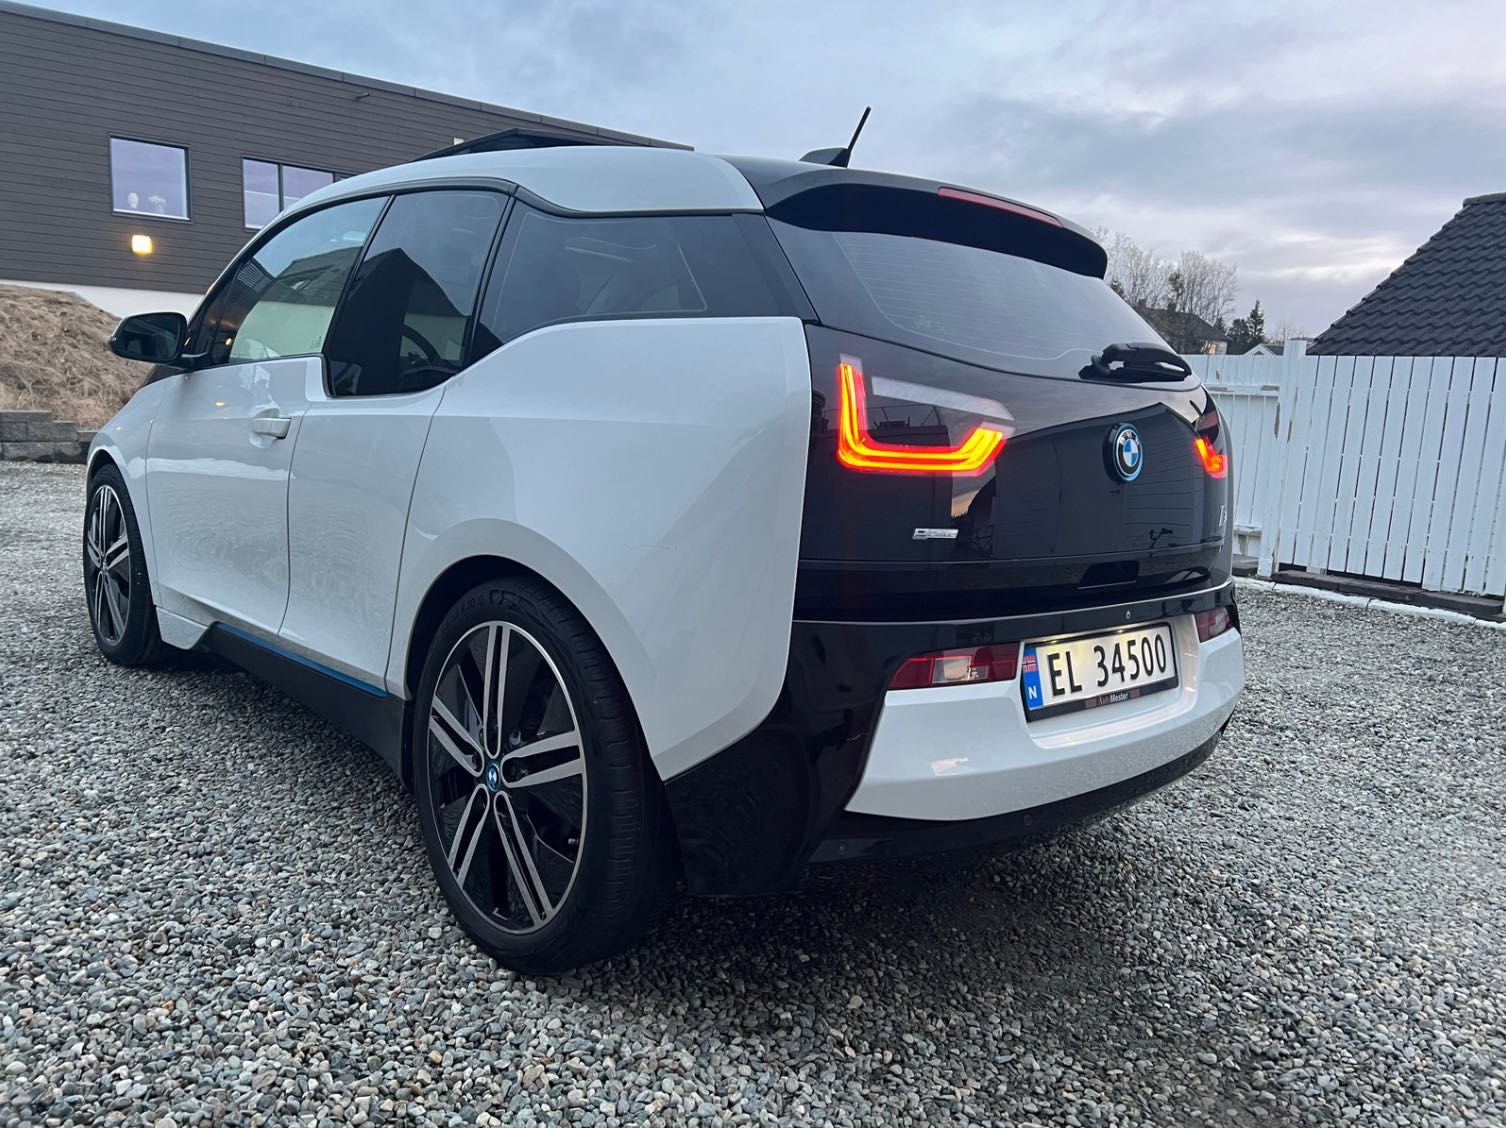 BMW i3 Fully Charged